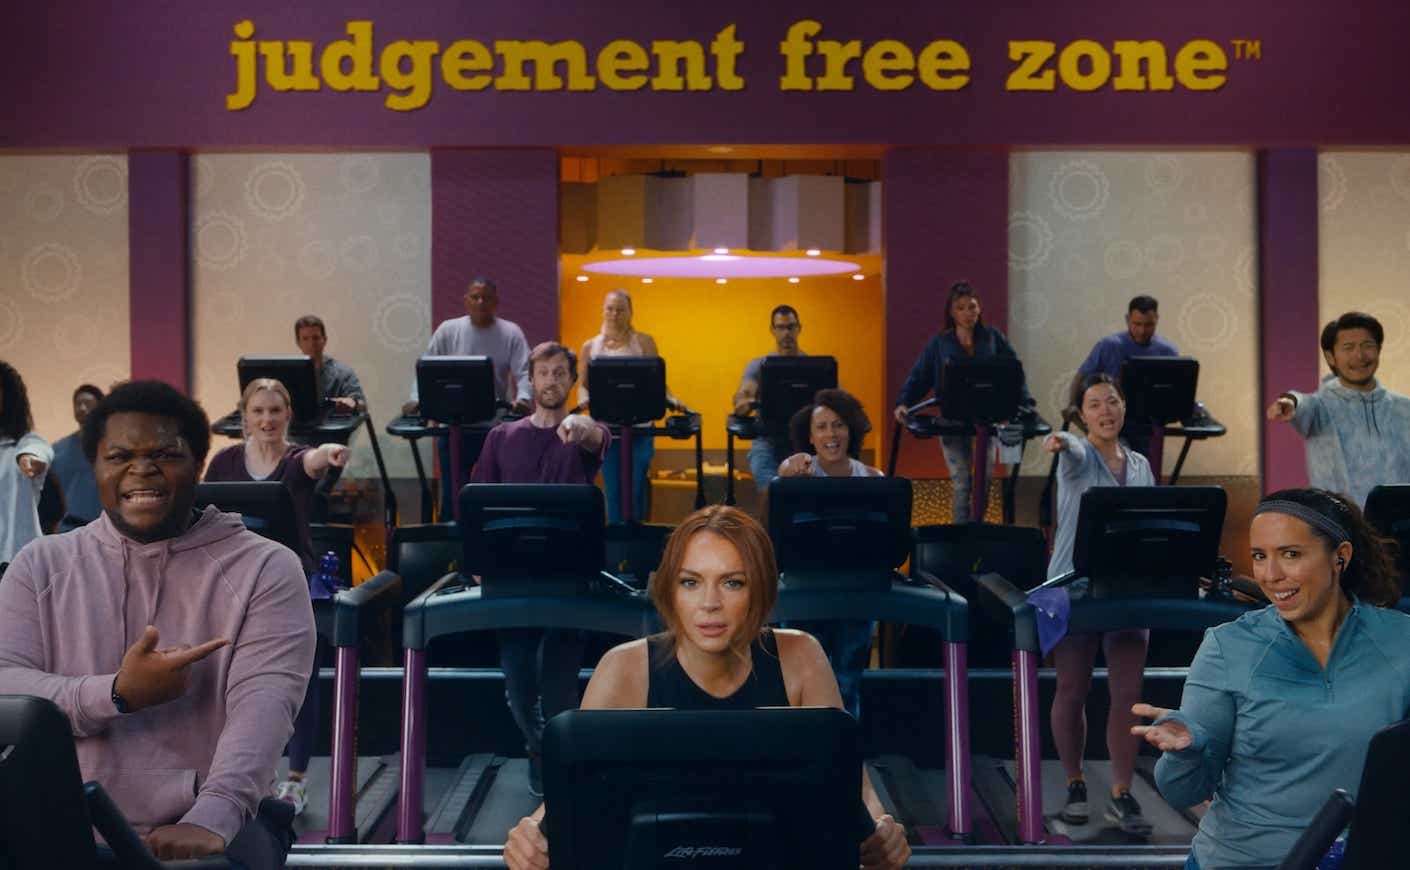 lindsay lohan's planet fitness commercial